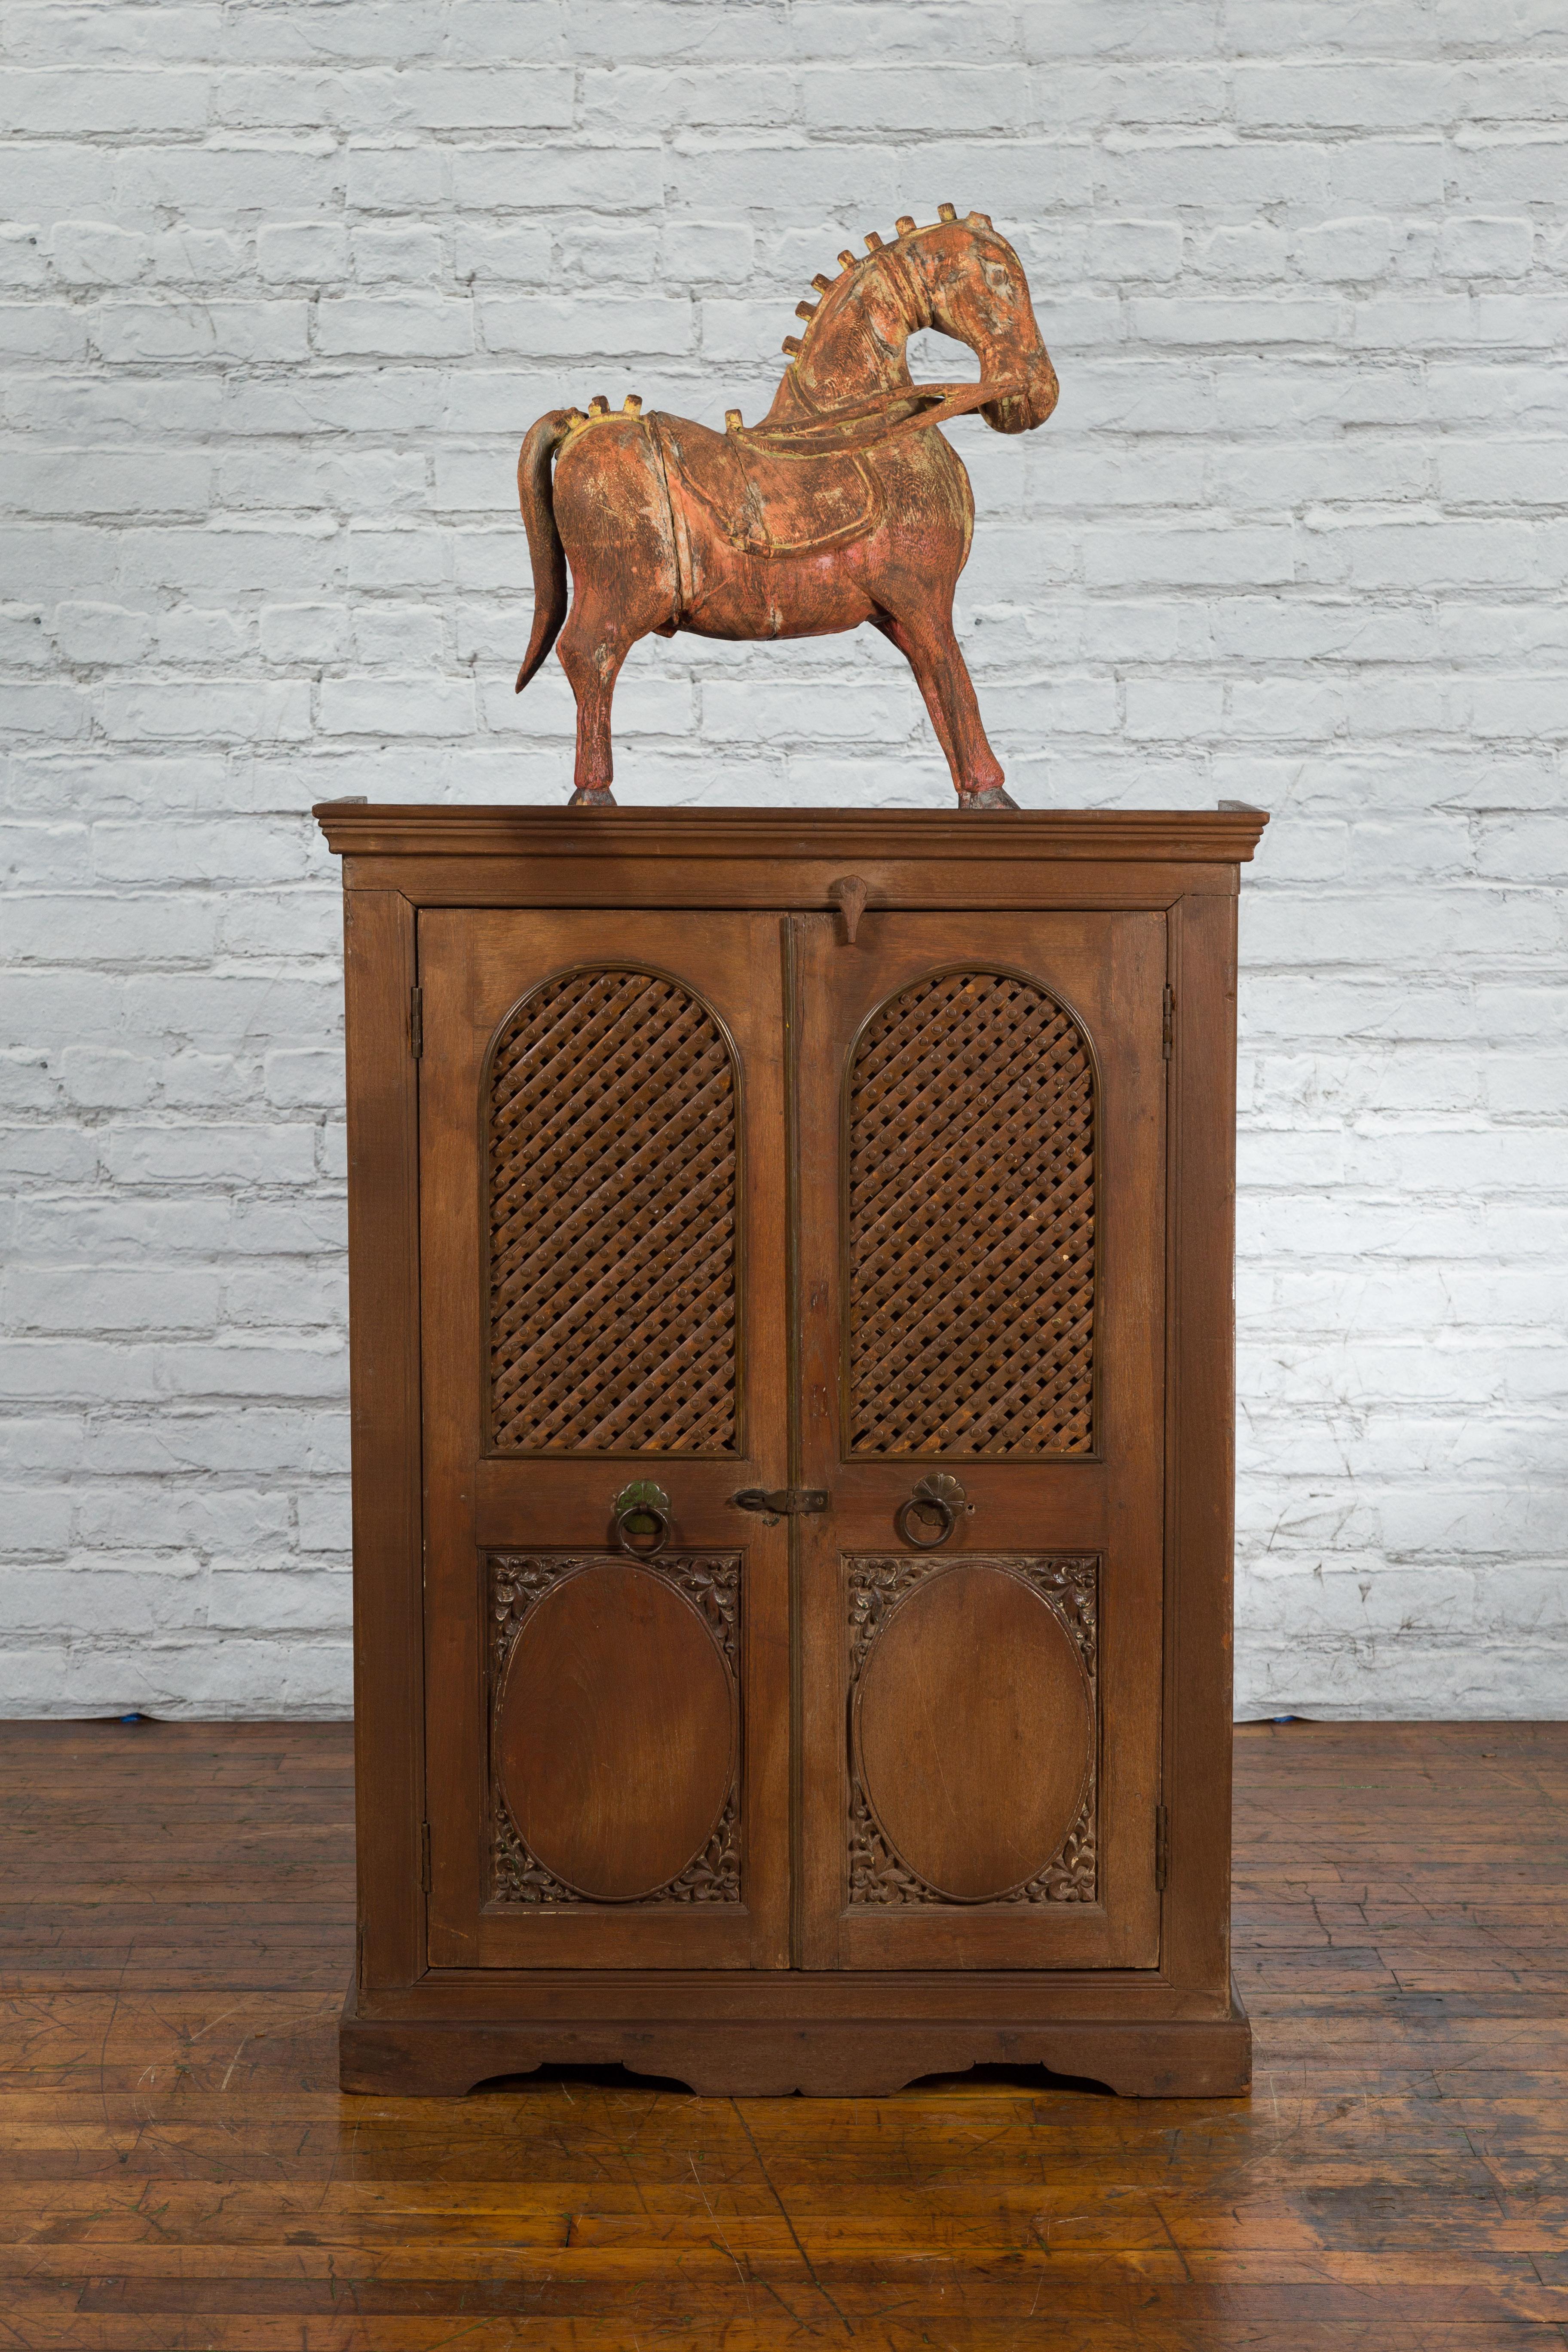 20th Century Indian Vintage Wooden Cabinet with Lattice Motifs and Carved Panels For Sale